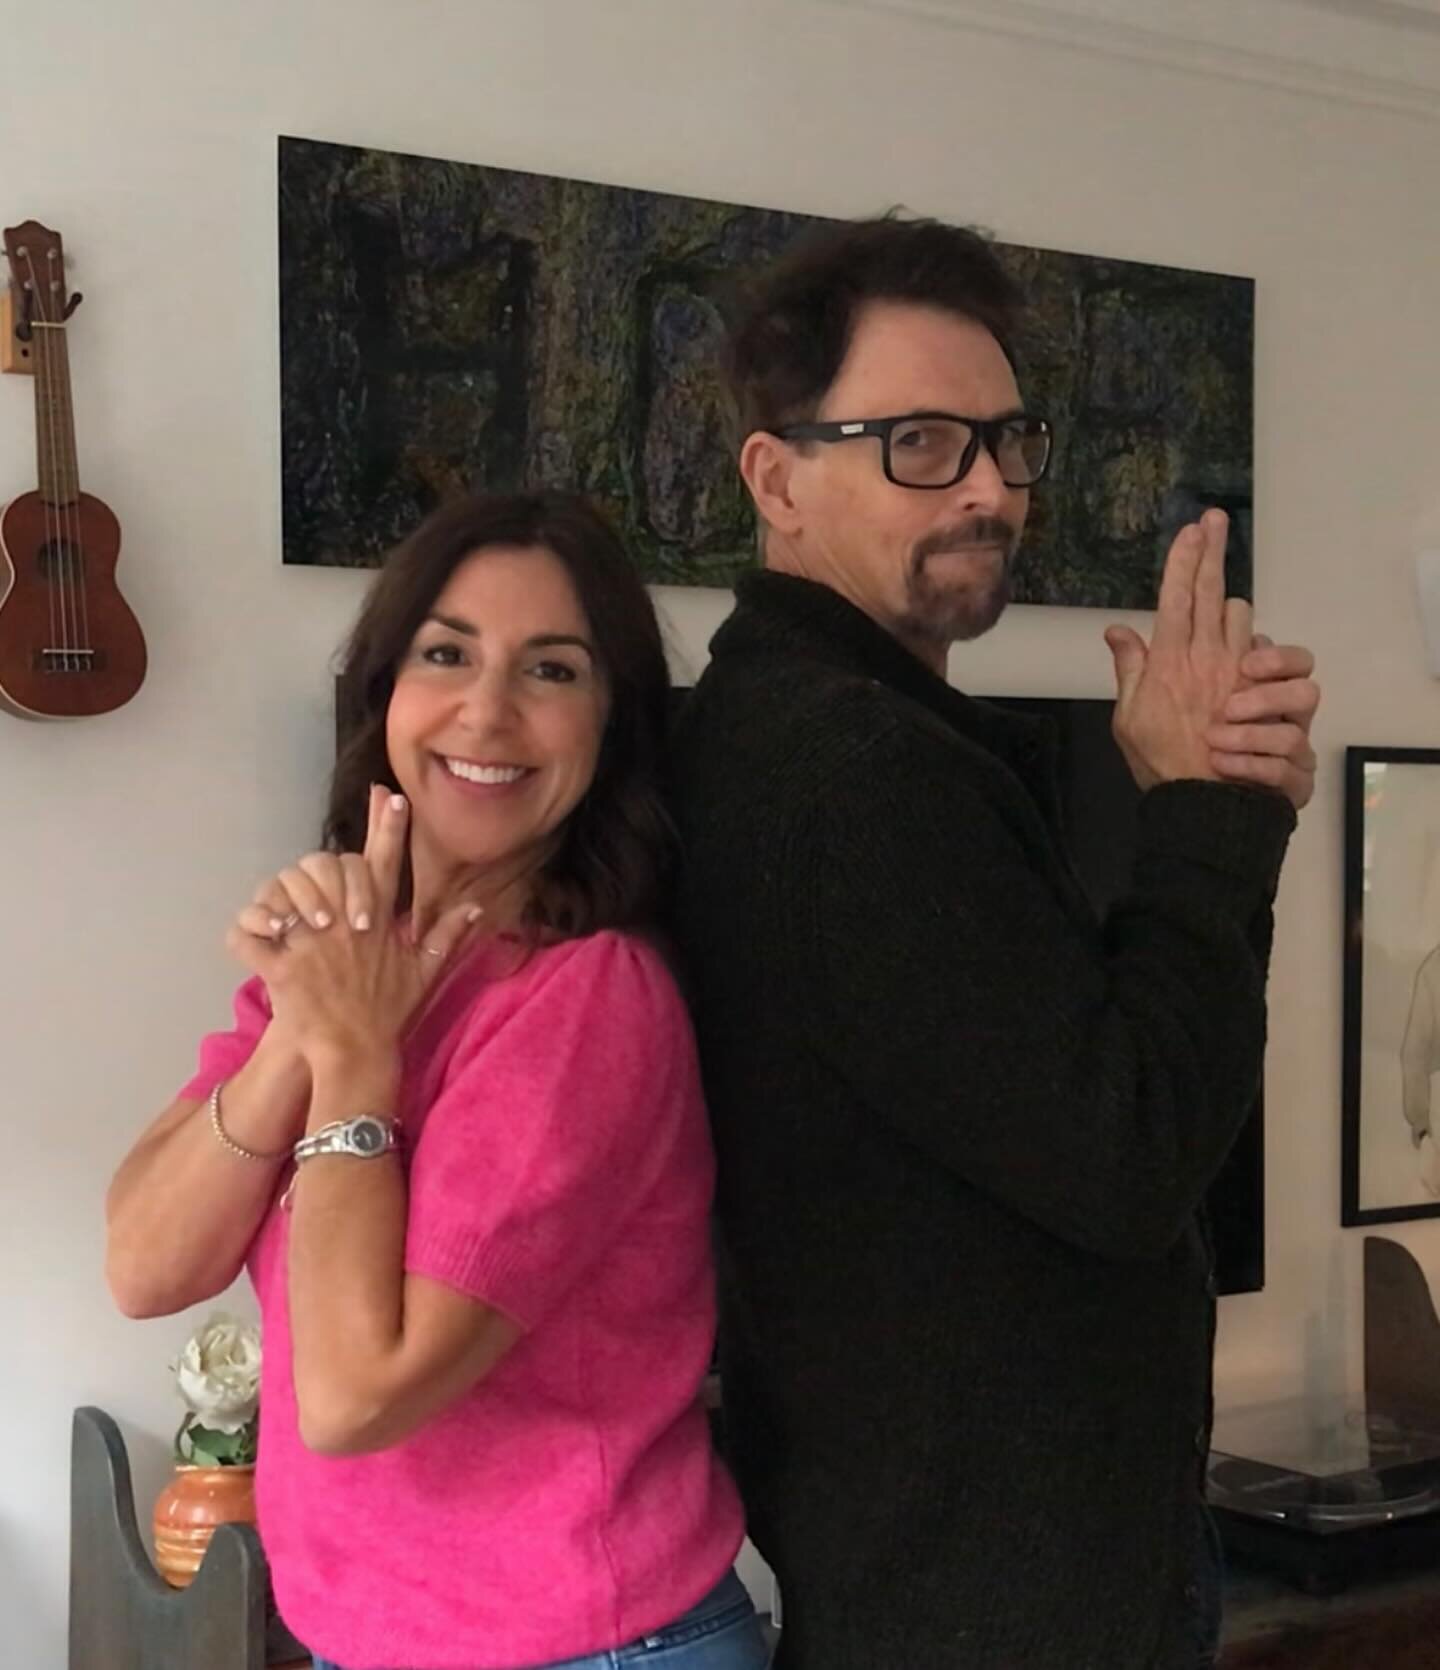 🔥Just released🔥 @timmydaly &amp; Kara solve life&rsquo;s problems again! Catch Really Famous with @karamayerrobinson now - on YouTube &amp; Apple Podcasts. Links in bio! You&rsquo;ll hear it all. As Tim says at the end, &ldquo;I said a lot of stuff